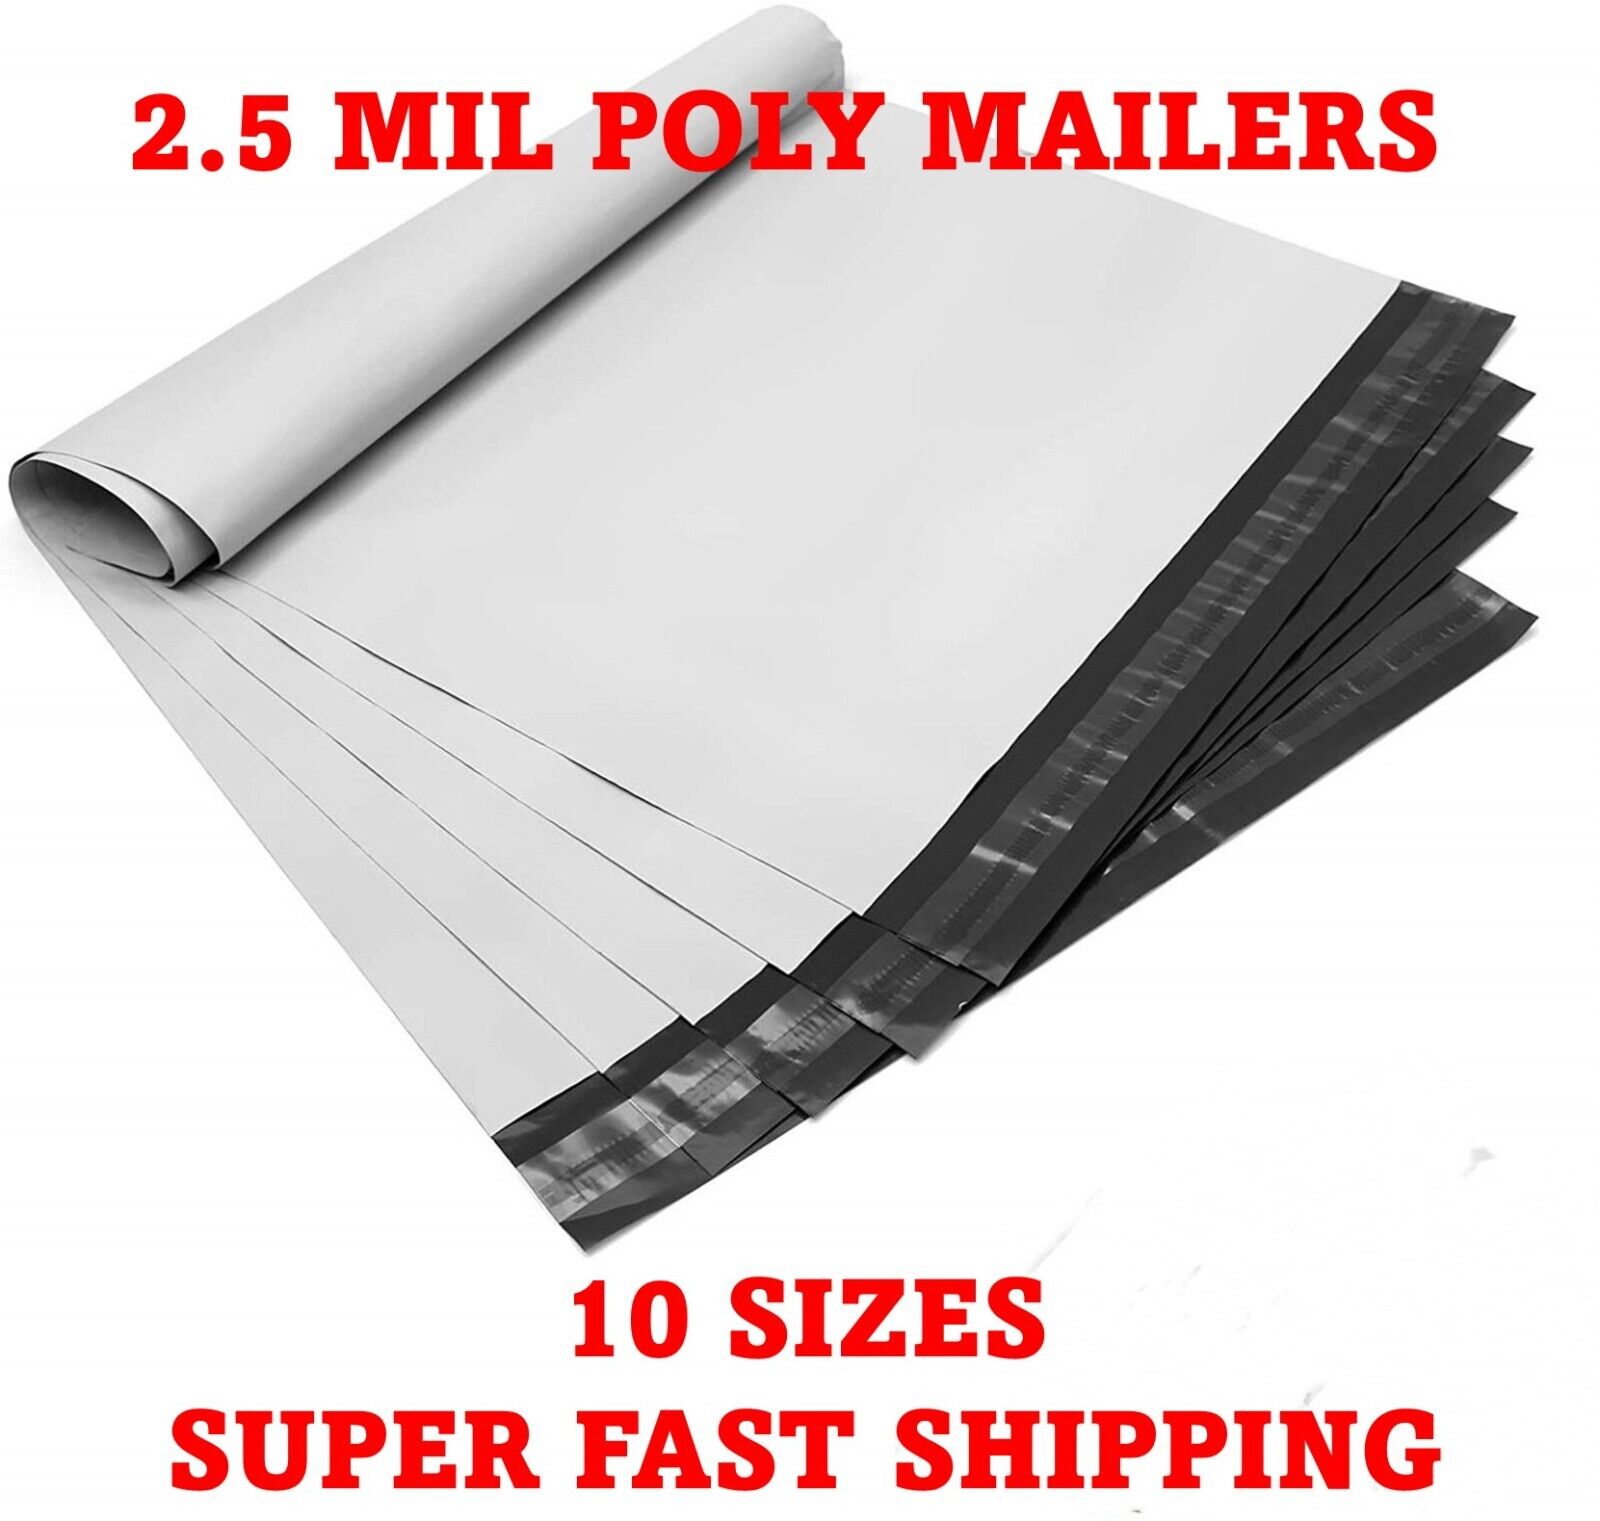 POLY MAILERS SHIPPING ENVELOPES SELF SEALING PLASTIC MAILING BAGS 2.5 MIL WHITE